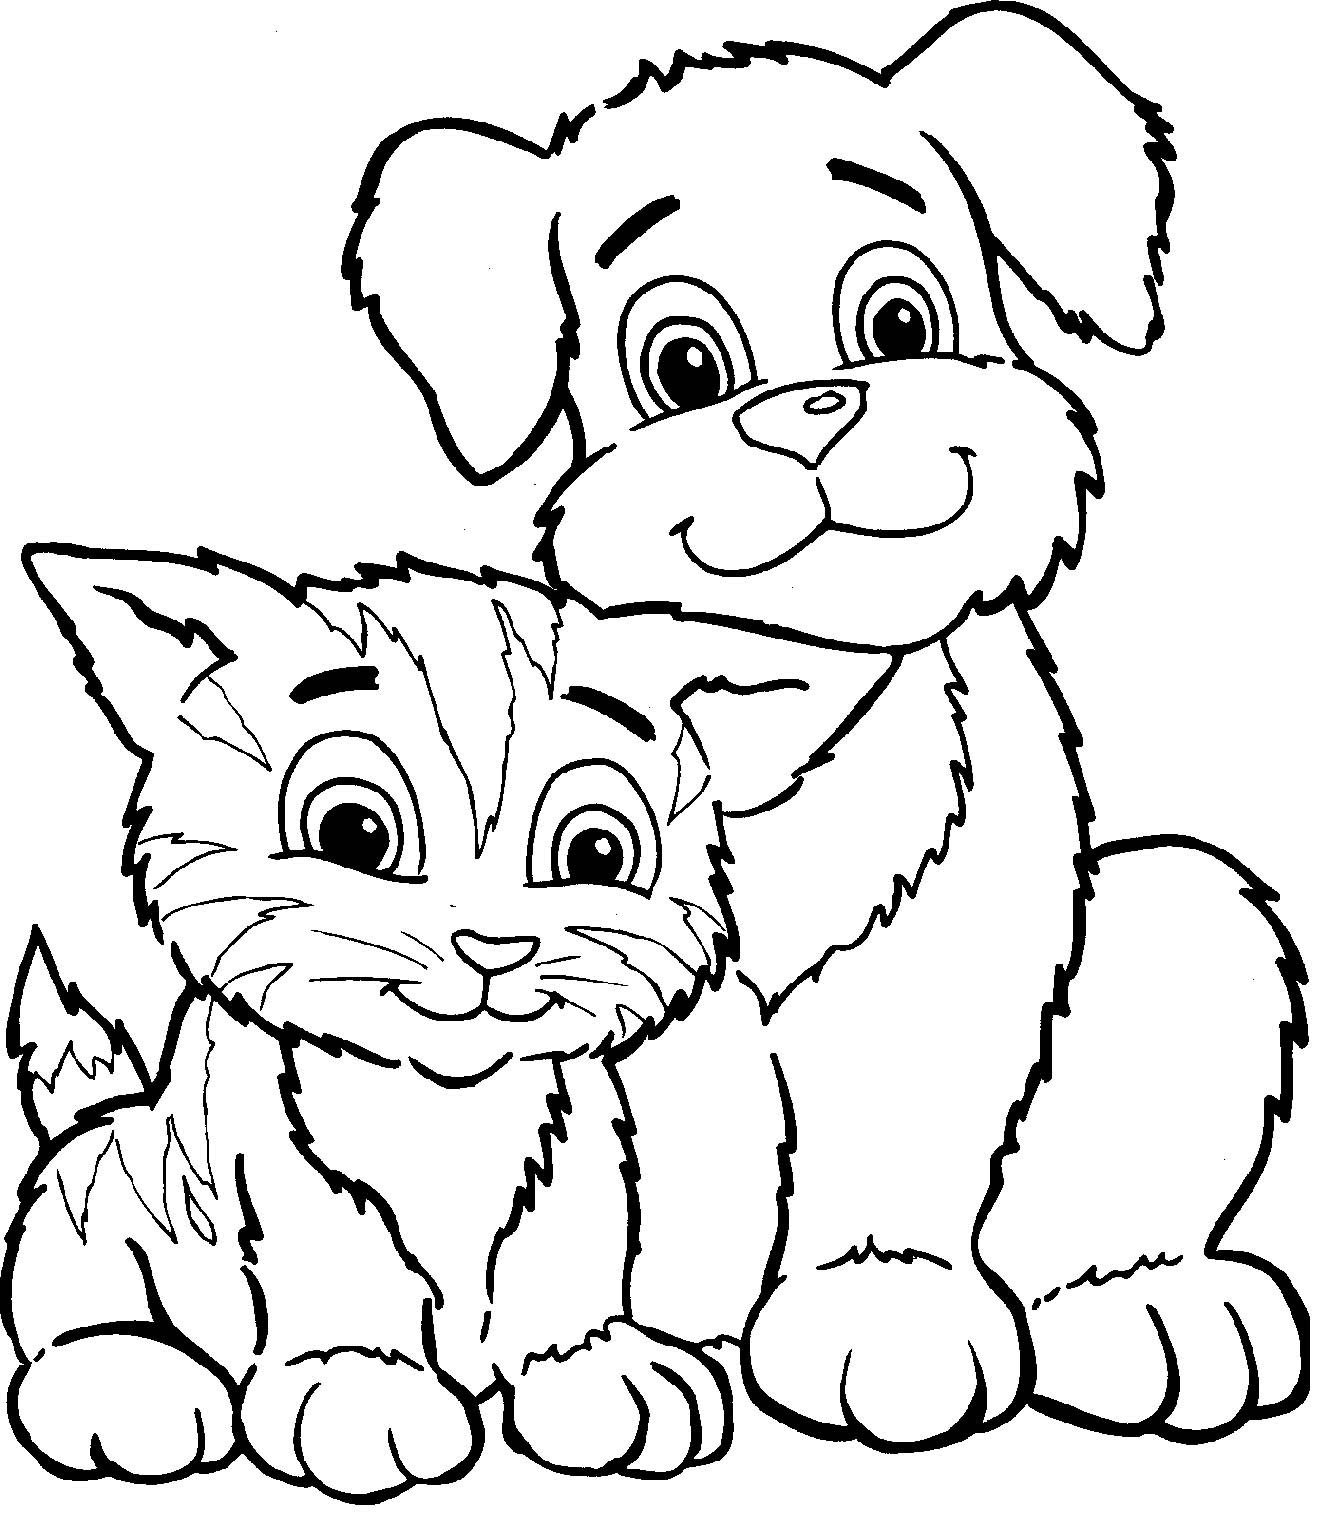 Unique Cat And Dog Coloring Pages 69 In Free Coloring Kids with Cat And Dog Coloring